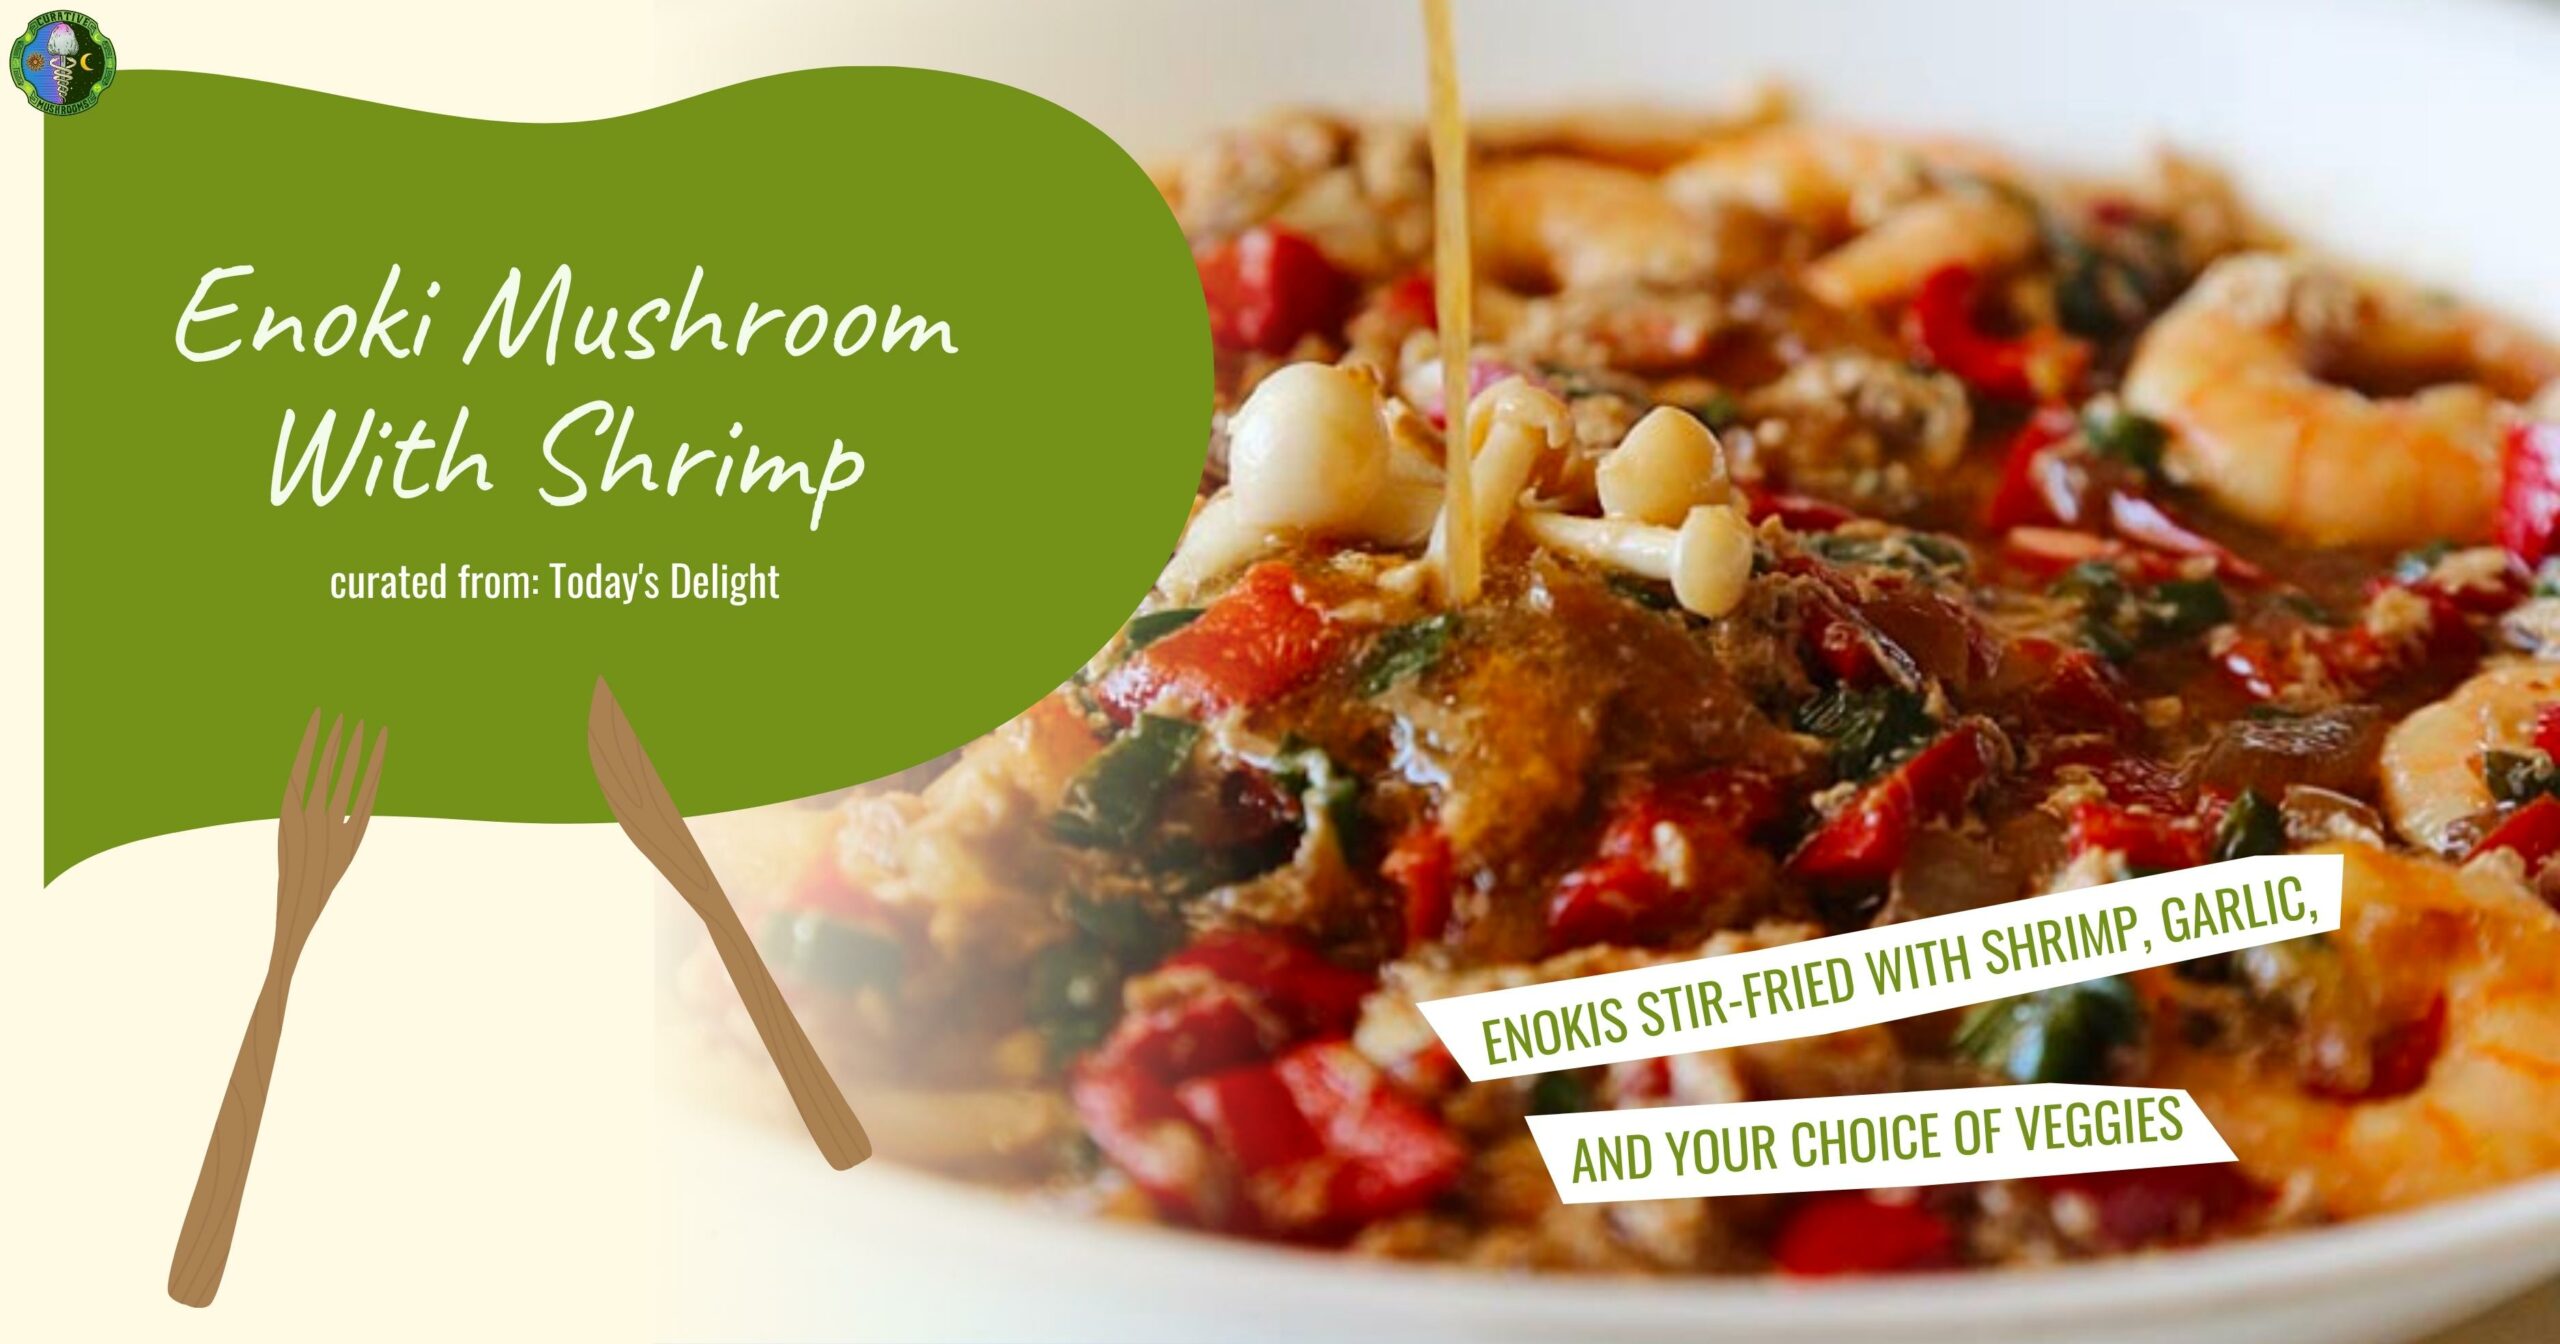 Enoki Mushroom With Shrimp - Easy Delicious Recipe - inspired by Today's Delight